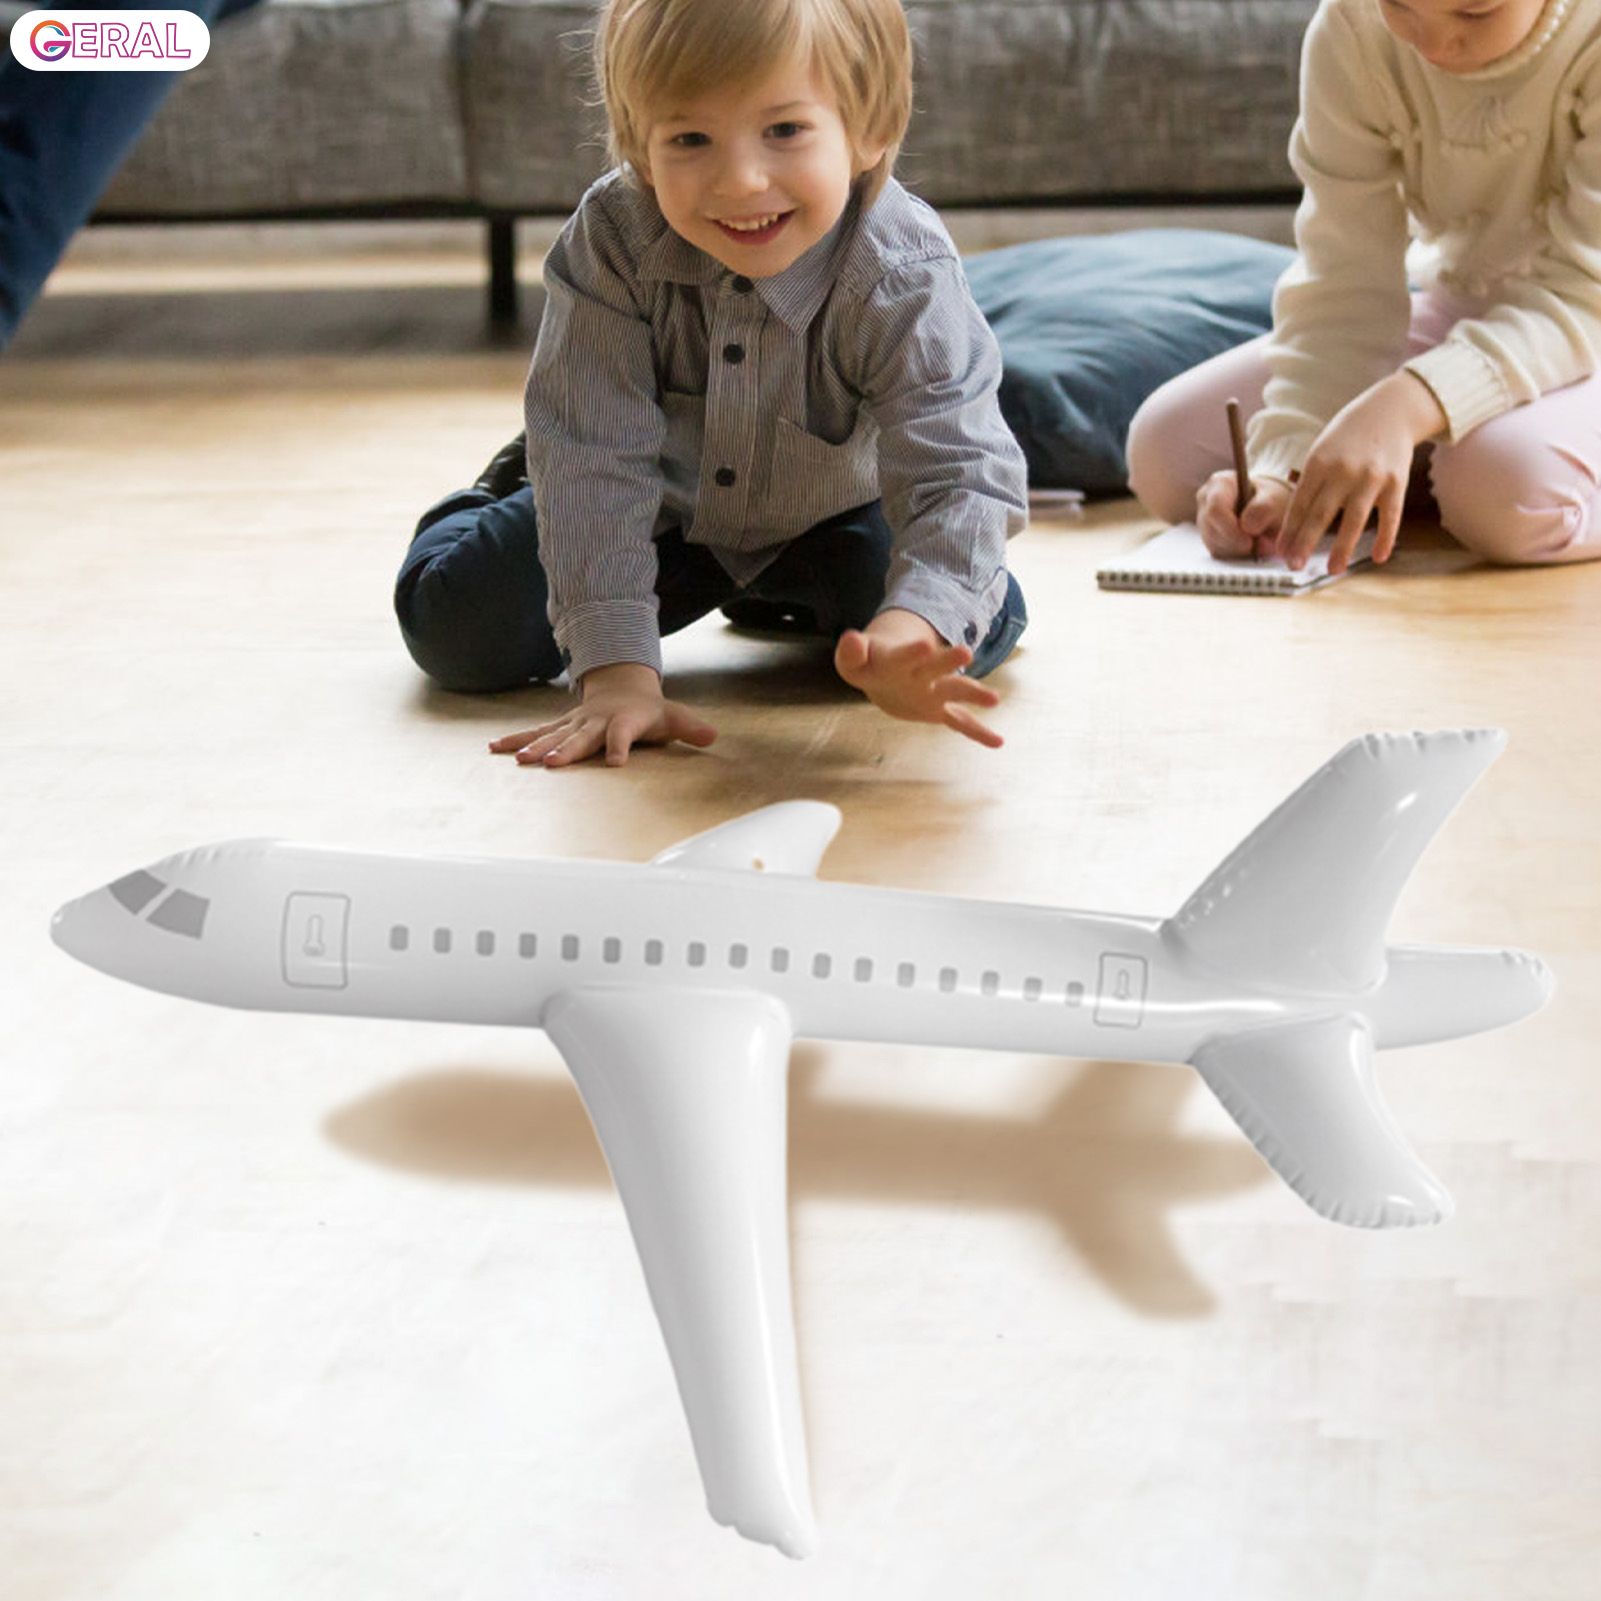 Geral Aircraft Toys Airplane Model Inflatable Airplanes Aircraft Inflates